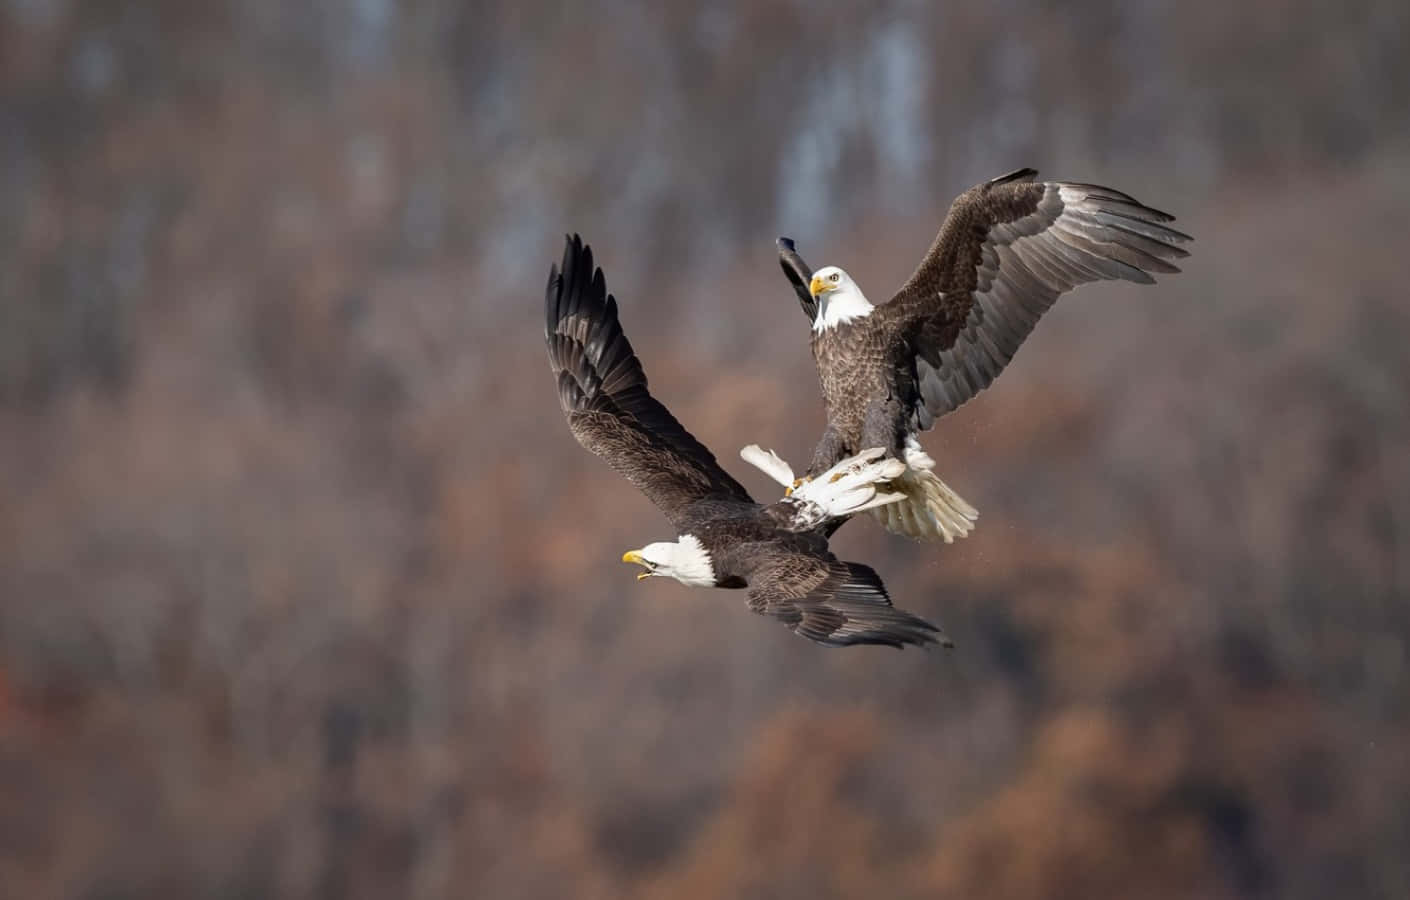 Two Bald Eagles Flying In The Air